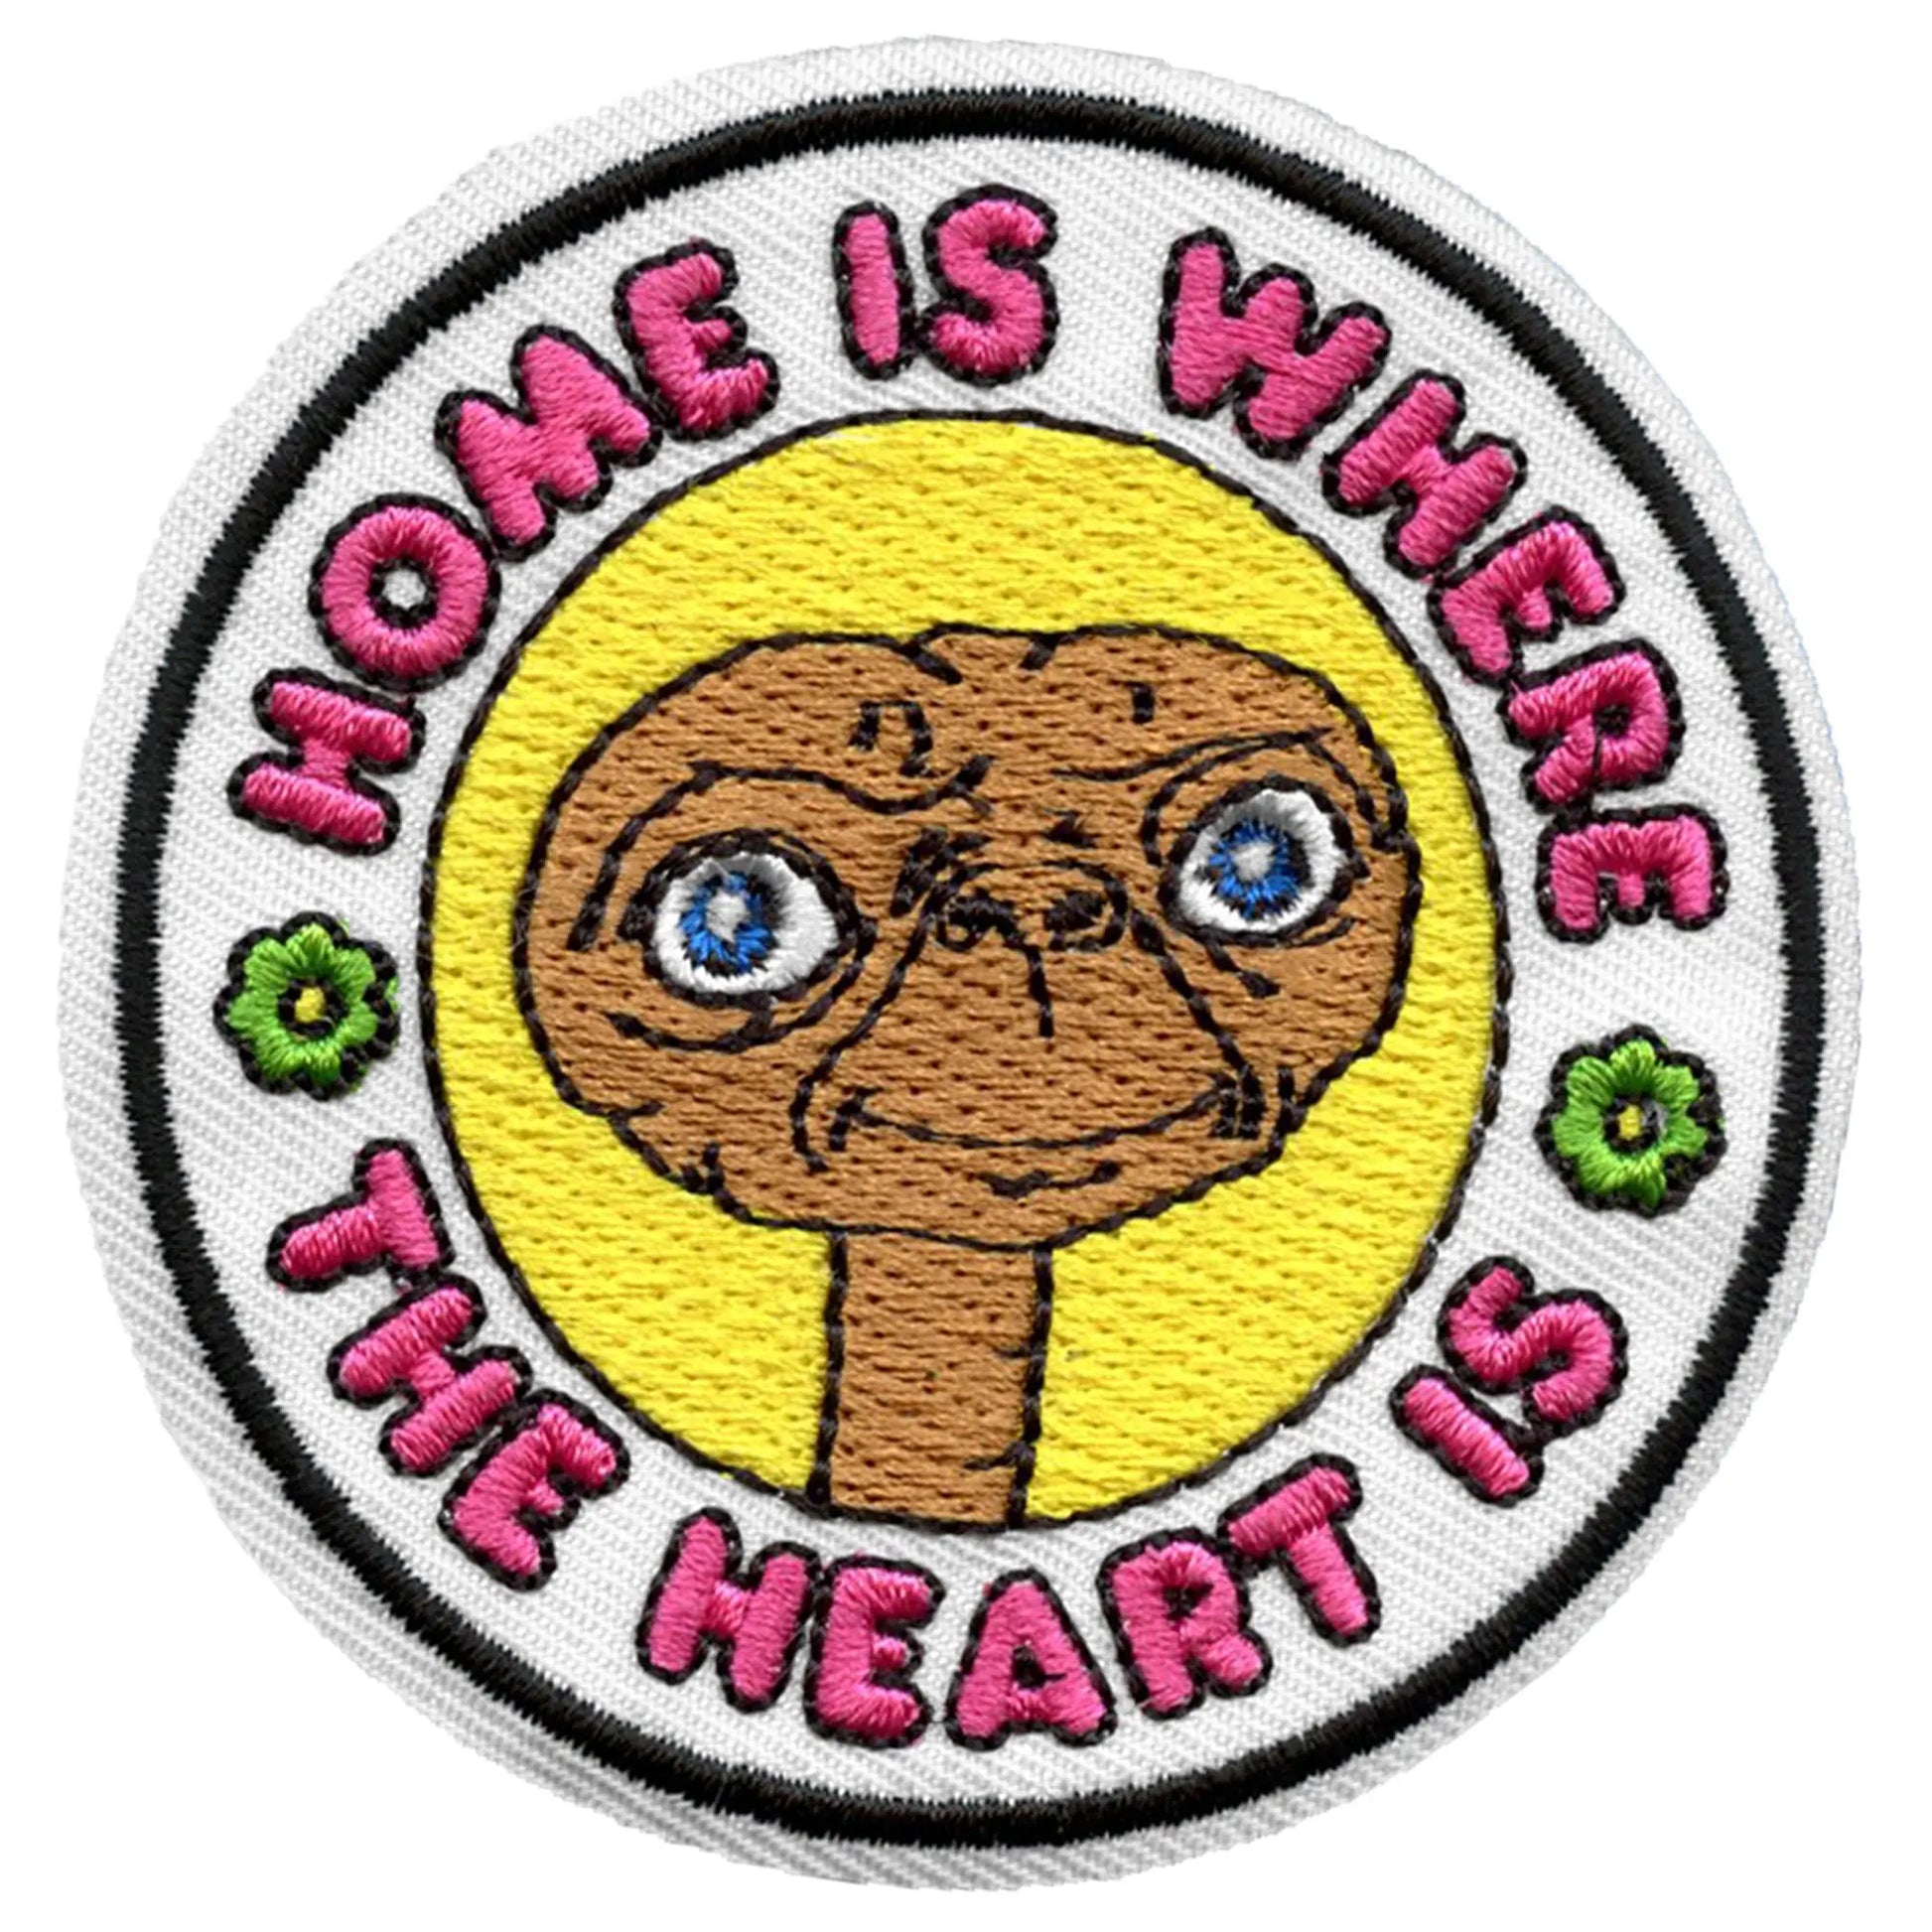 ET Home is Where The Heart is Patch Nostalgic Alien Movie Embroidered Iron On